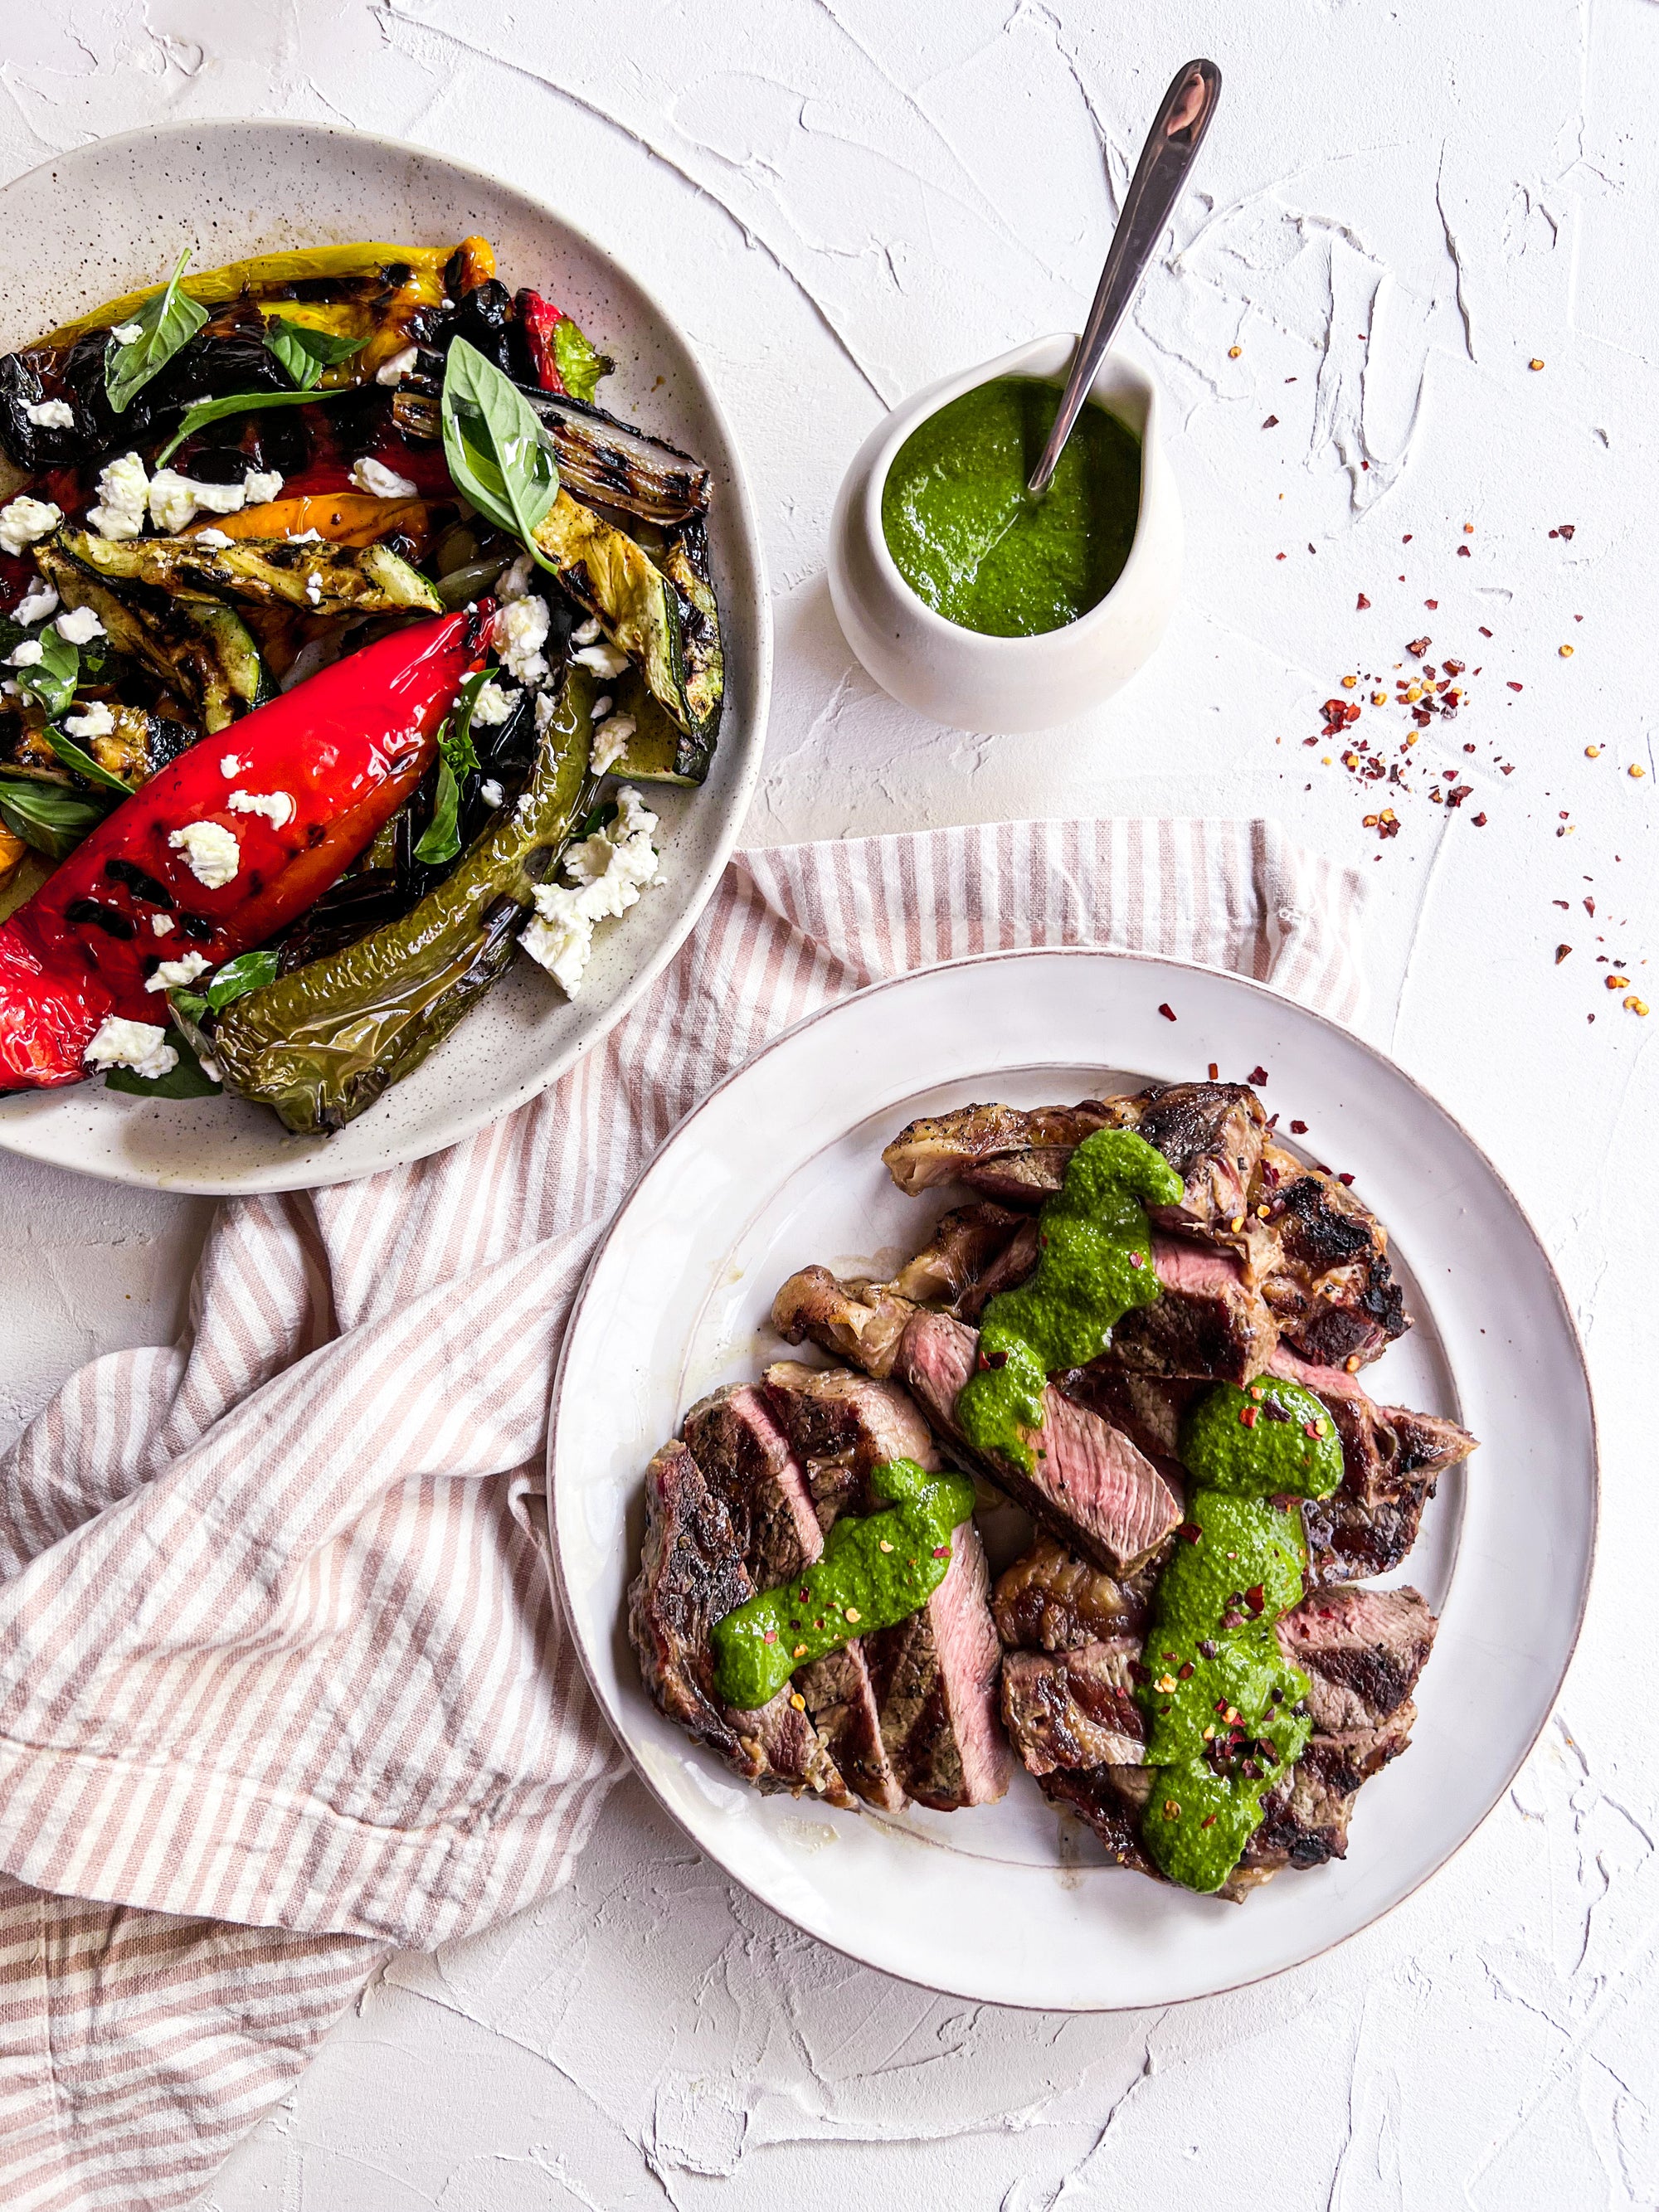 BBQ’d Sirloin and grilled summer veggies drizzled in homemade chimichurri dressing